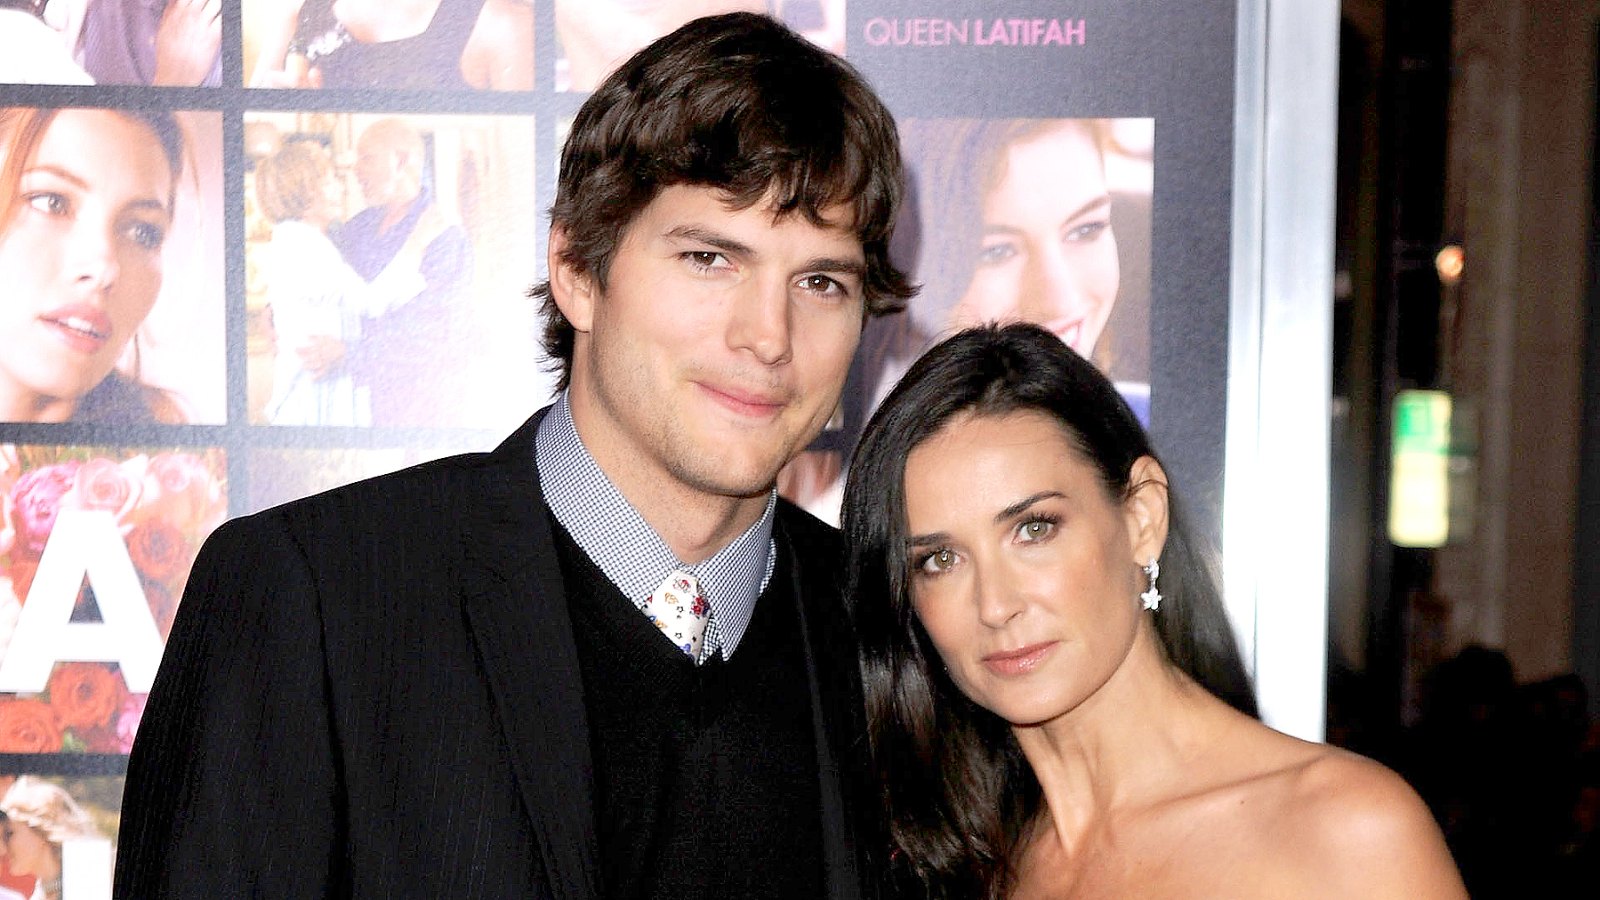 Ashton Kutcher and Demi Moore arrive at the premiere of New Line Cinema's 'Valentine's Day' at Grauman's Chinese Theatre on Feb. 8, 2010, in Hollywood.